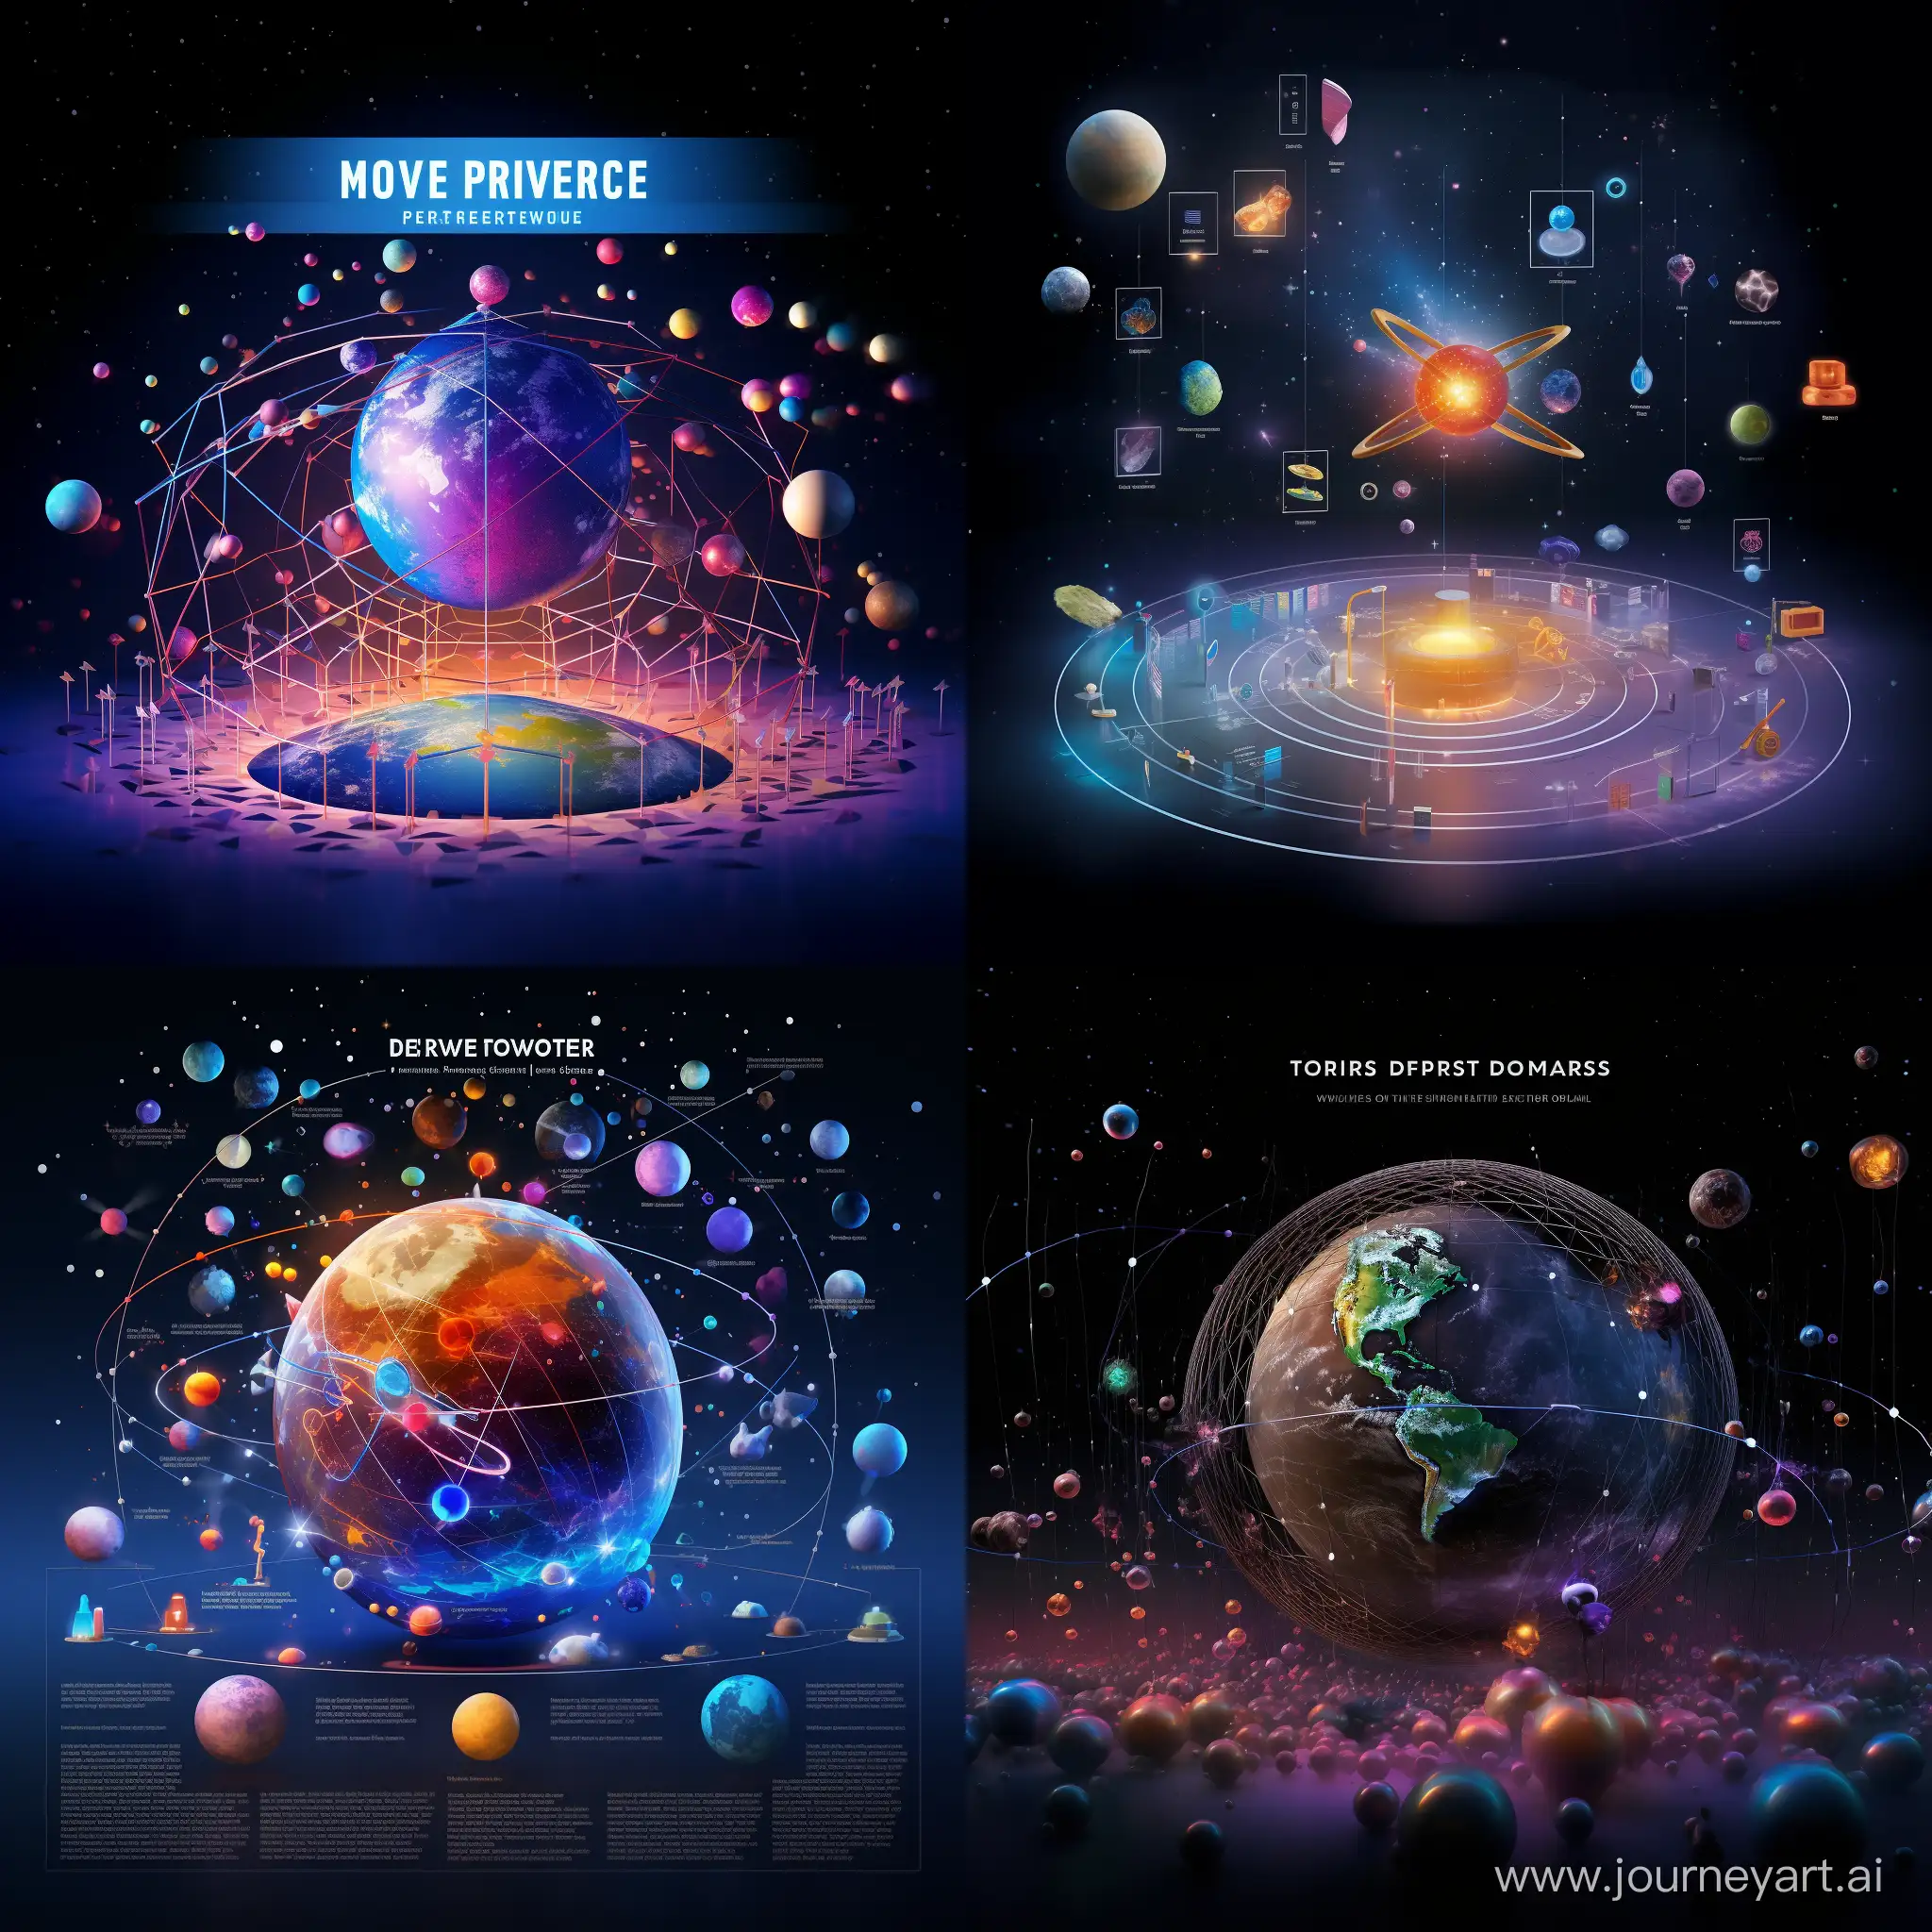 A visually engaging and educational image for an Instagram reel about the world of physics. The image features a vibrant, high-tech laboratory setting with futuristic equipment, 3D models of atoms and molecules, and a large holographic display showing a complex physics equation. The background includes a galaxy and stars, symbolizing the exploration of the universe. The scene is designed to be visually captivating and to spark curiosity about science and physics, making it ideal for attracting interest on social media.